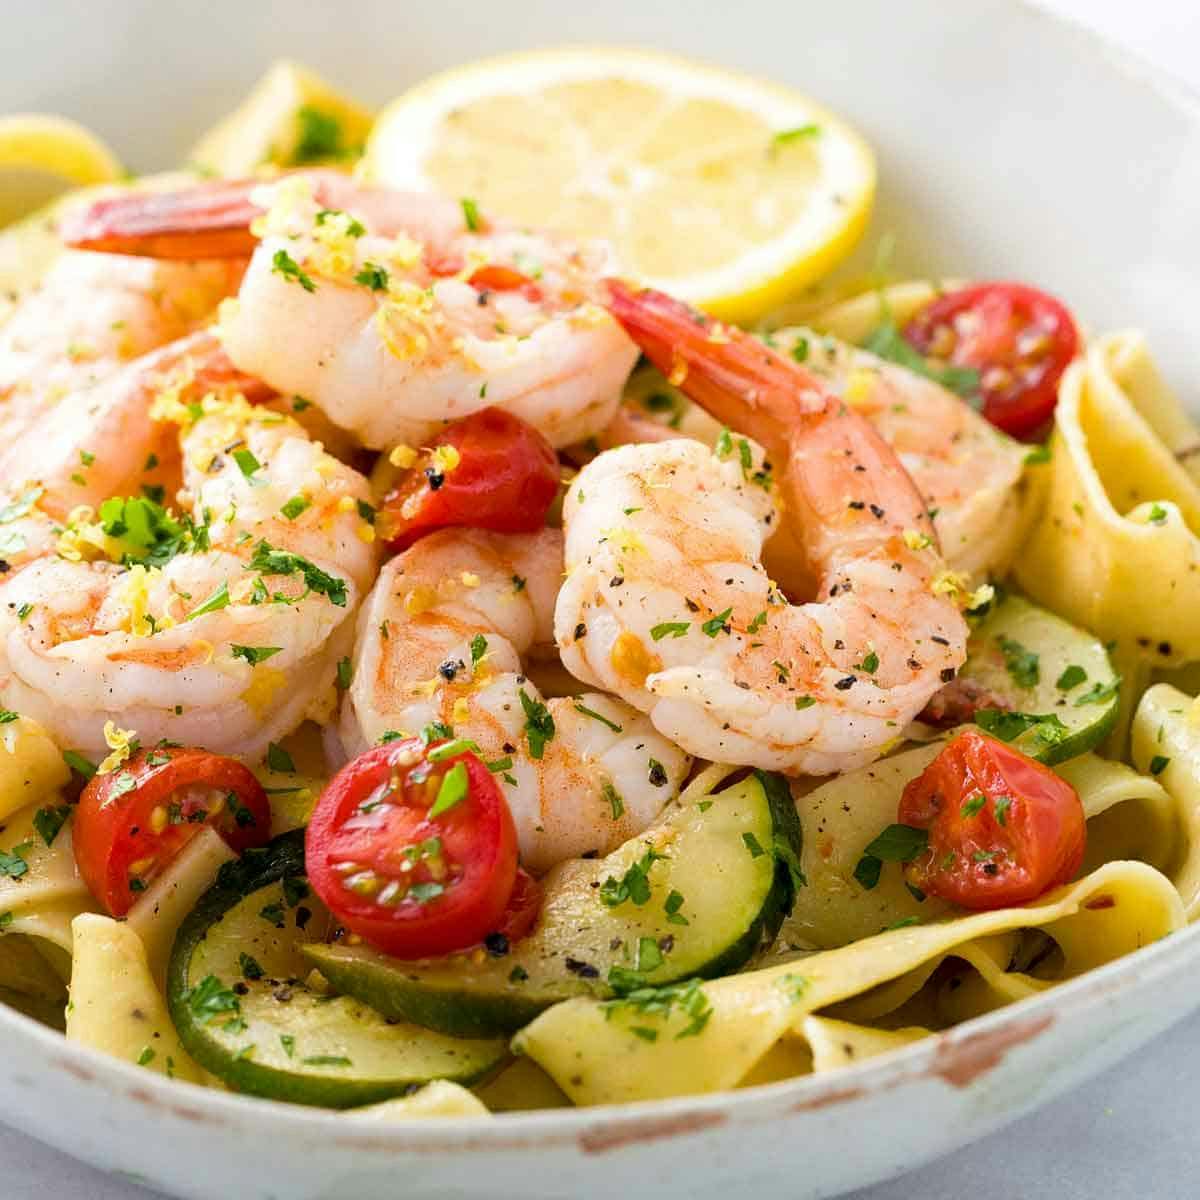 One dish of Creamy Pasta with Lemon and Shrimp 